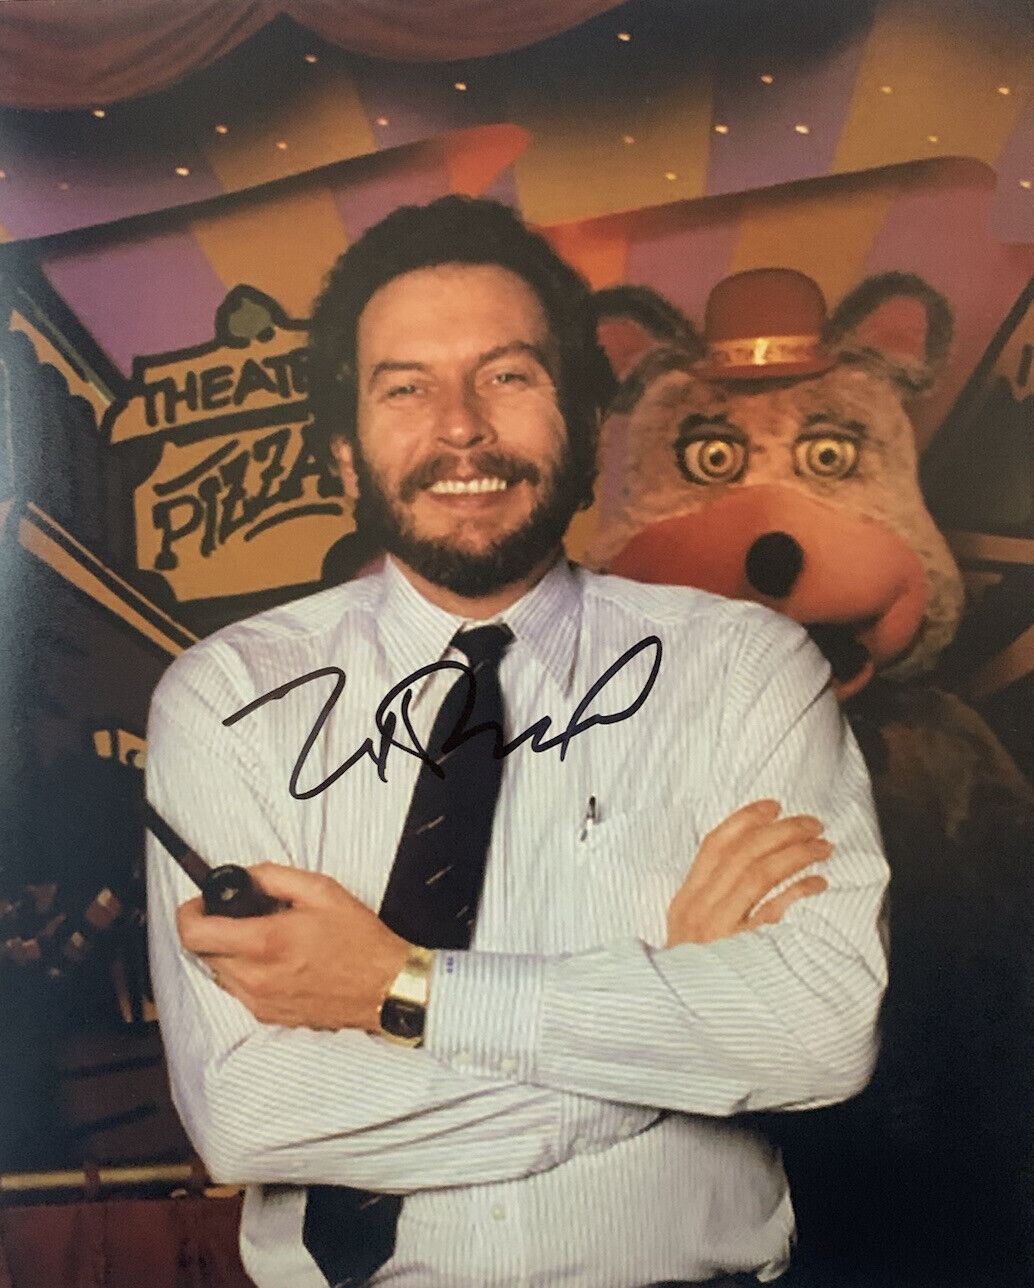 NOLAN BUSHNELL HAND SIGNED 8x10 Photo Poster painting CHUCK E CHEESE AUTOGRAPHED AUTHENTIC